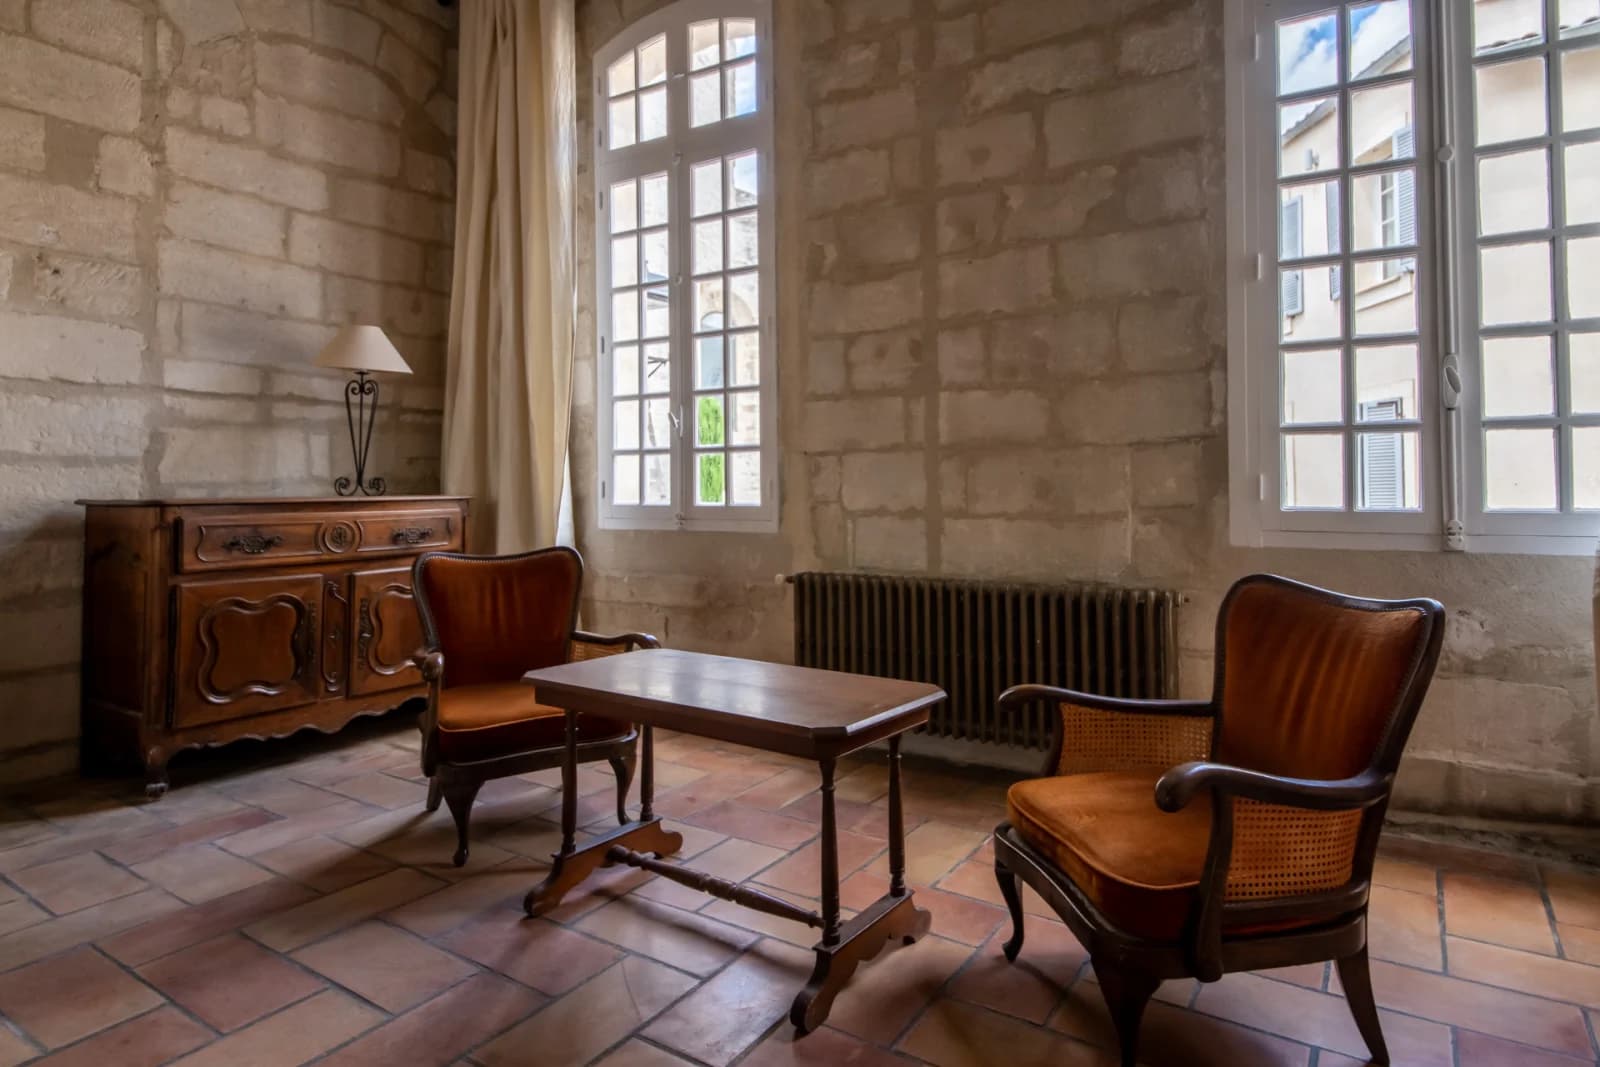 Meeting room in 16th-century town house 5 minutes from Avignon - 3